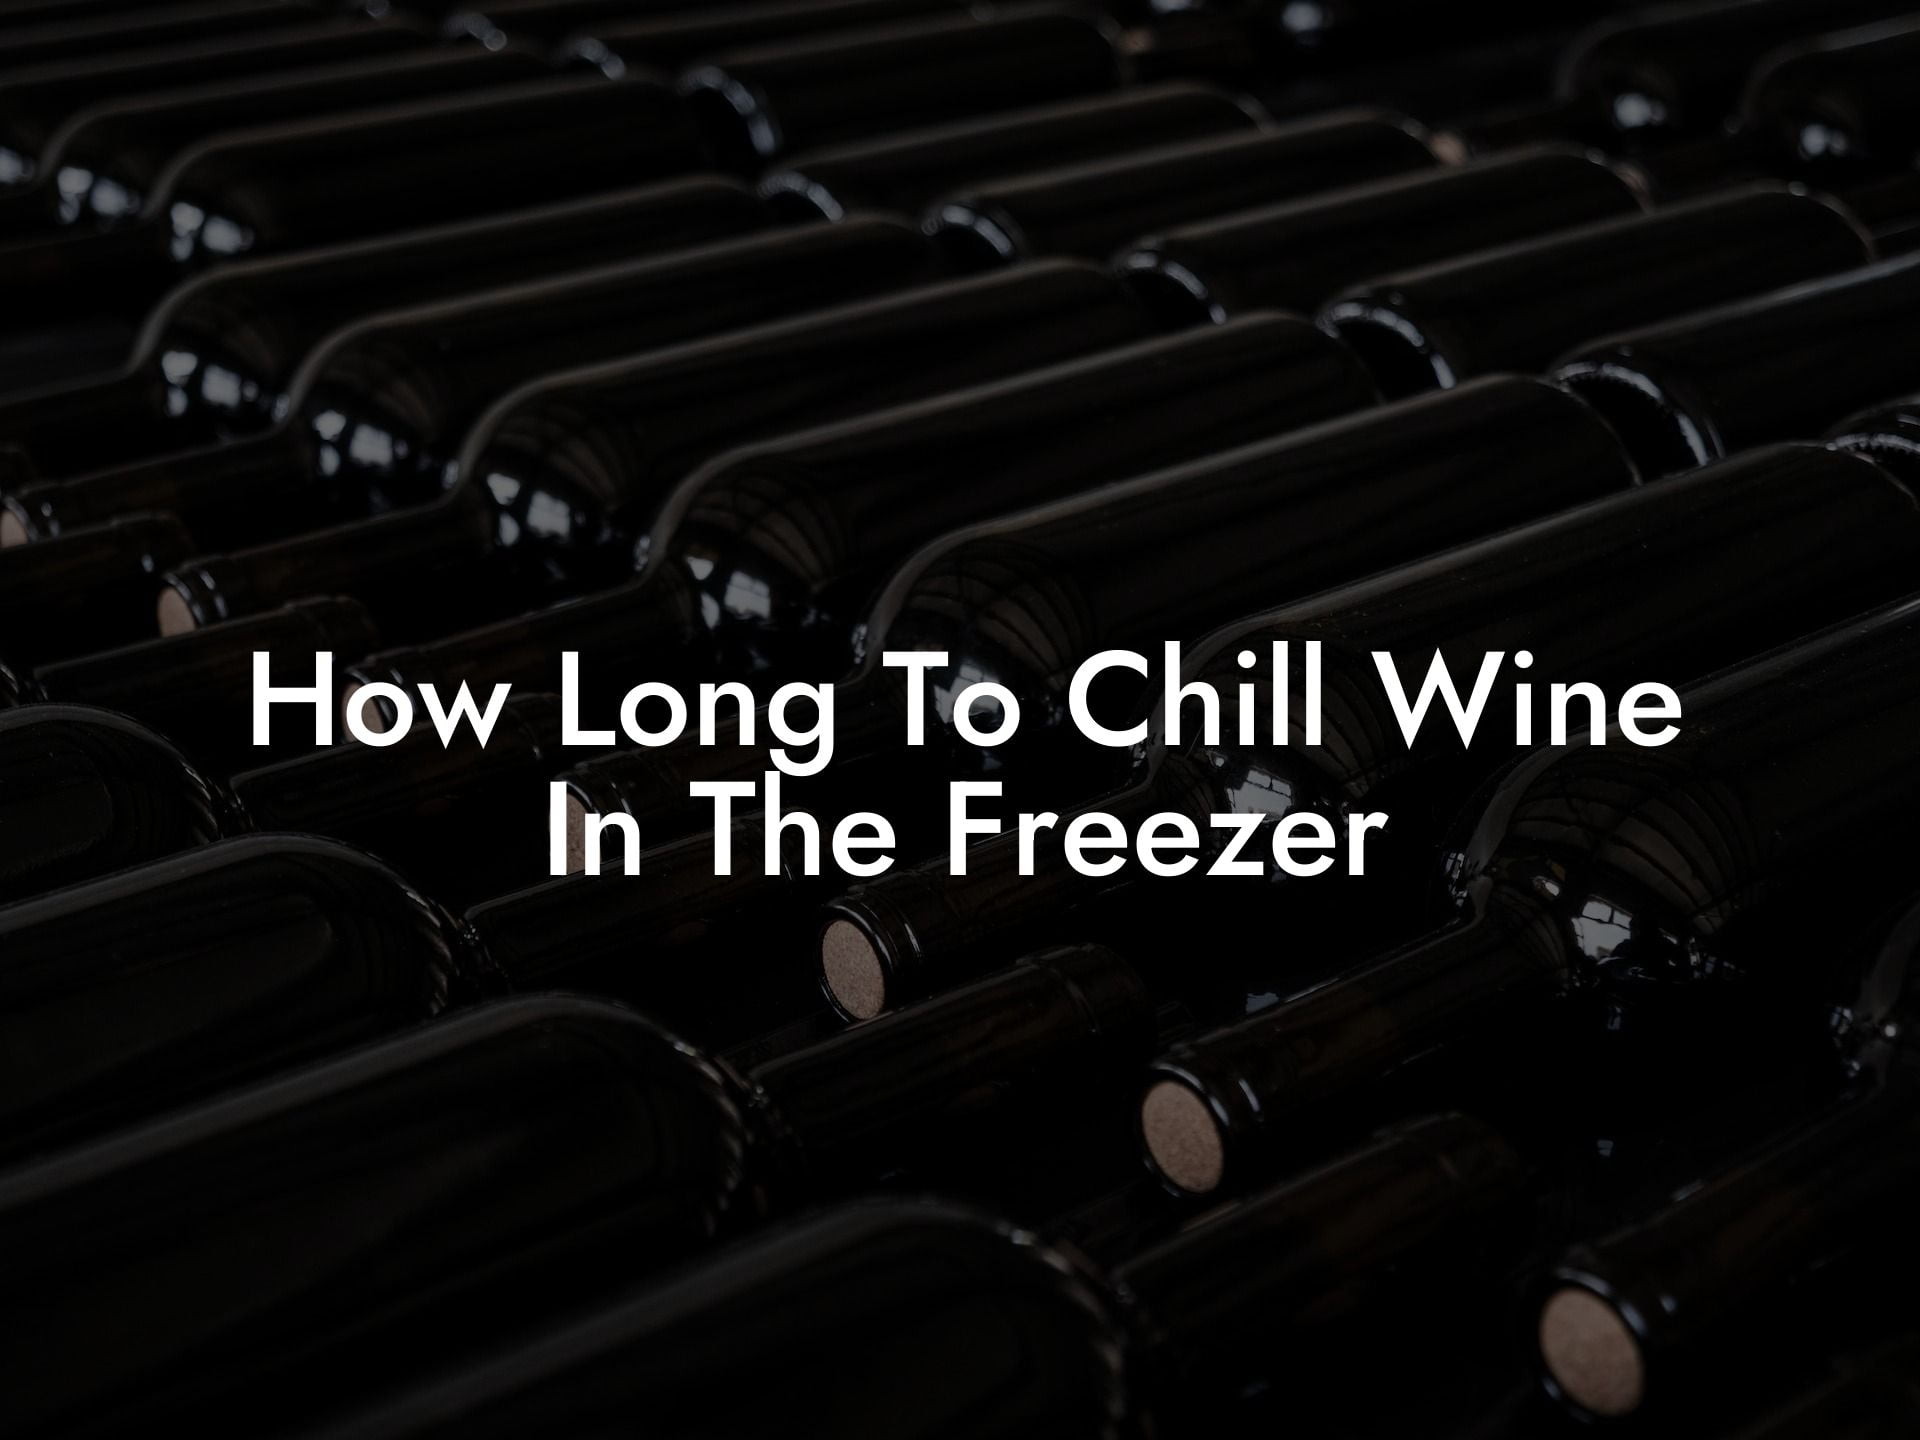 How Long To Chill Wine In The Freezer